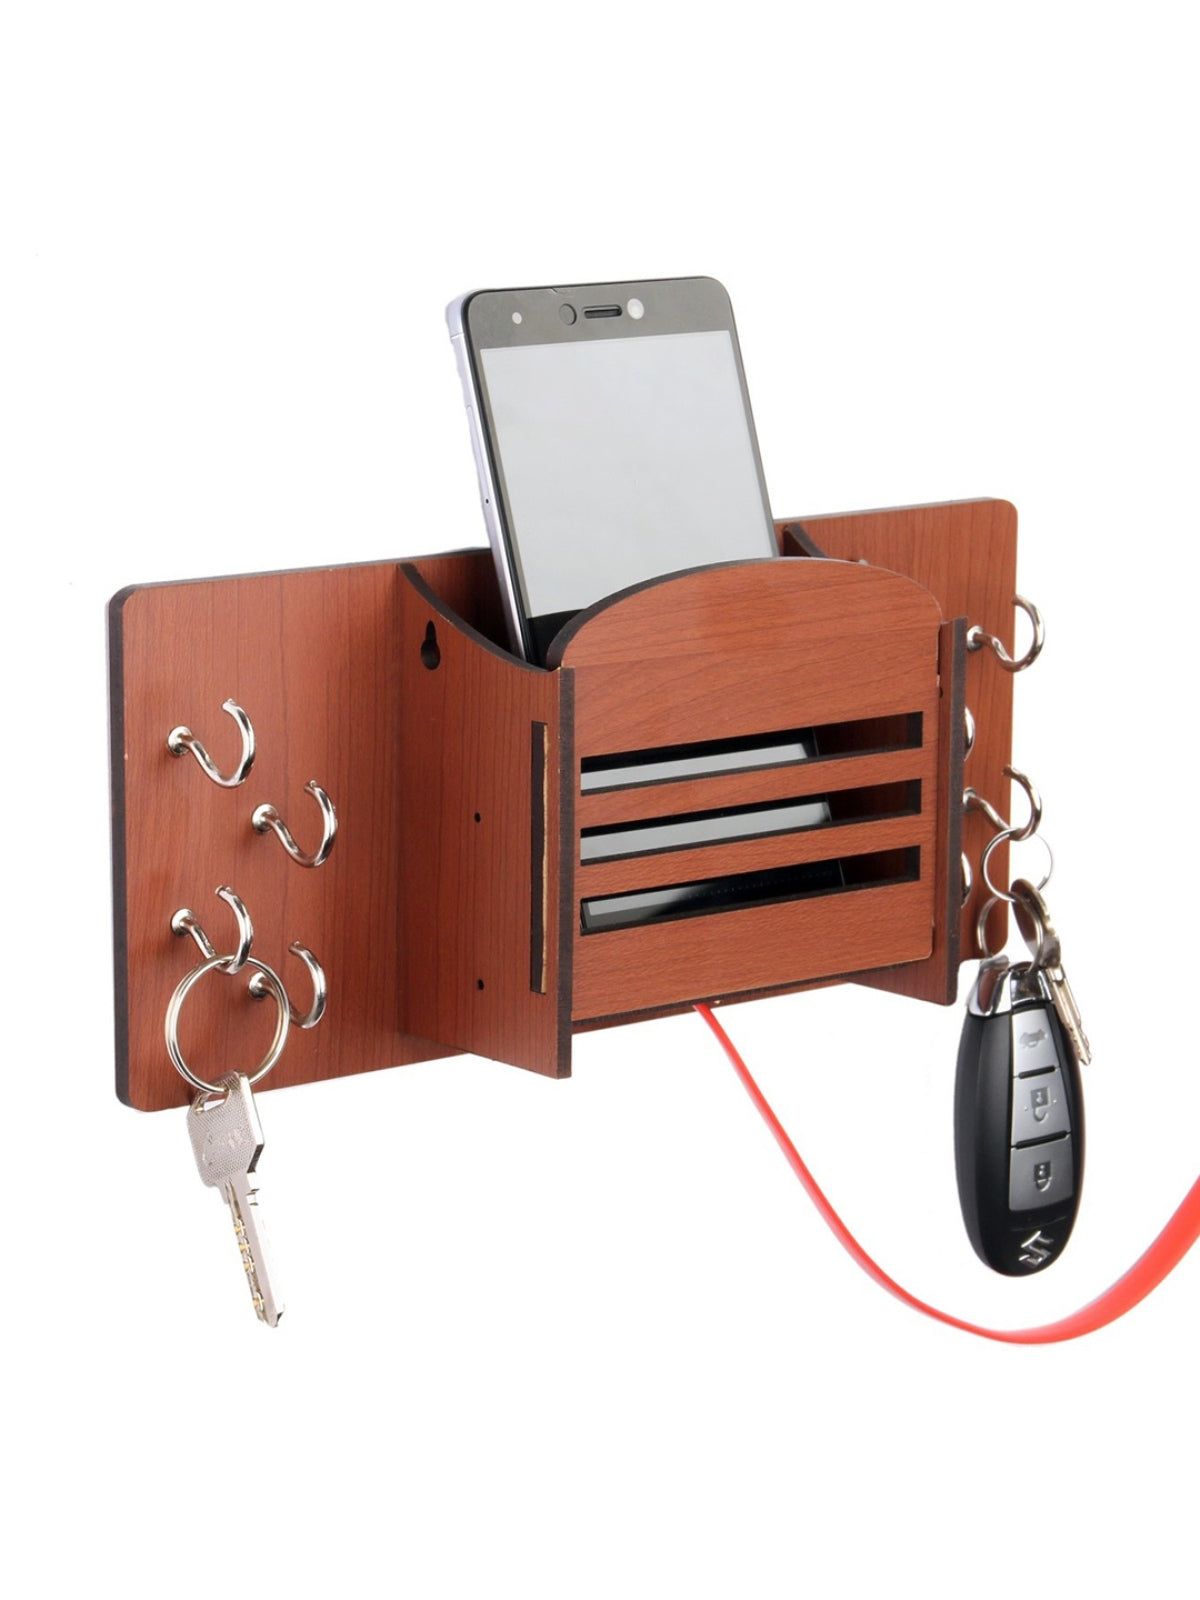 Wooden Key Holder With 1 Mobile Stand Holder For Home & Office Wall Decorative